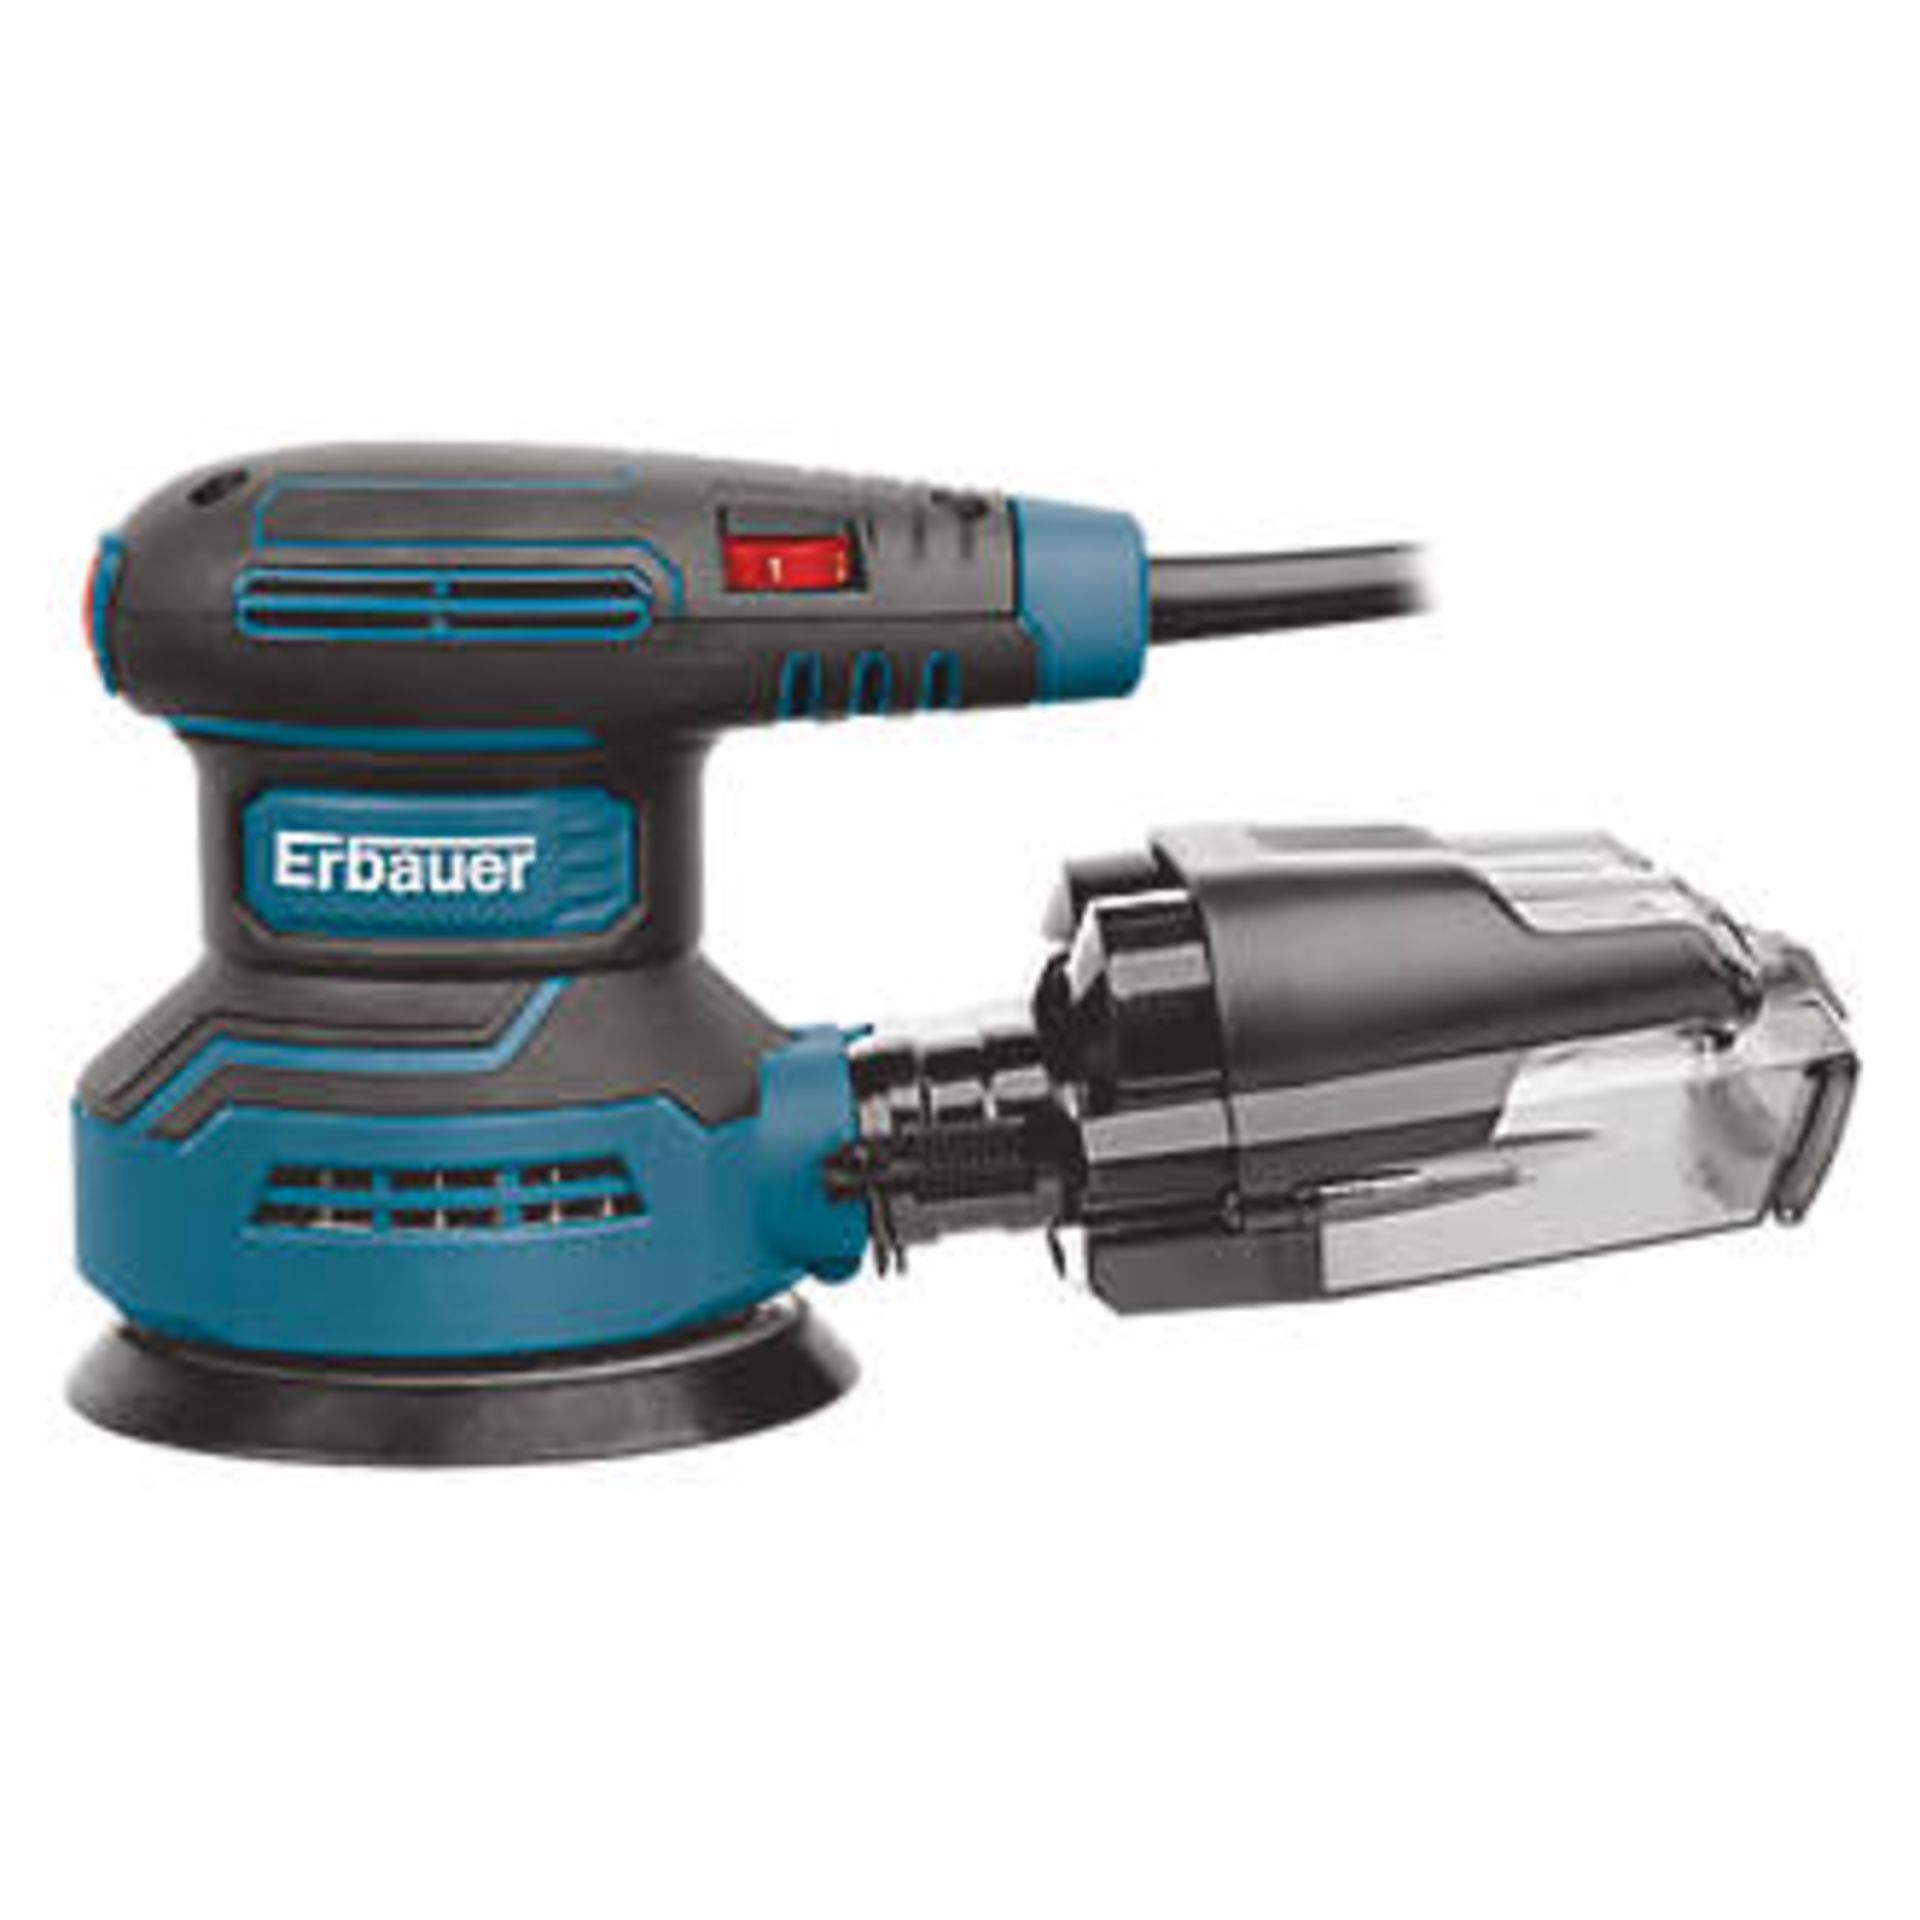 ERBAUER 400W ORBITAL SANDER RRP £49.99Condition ReportAppraisal Available on Request- All Items